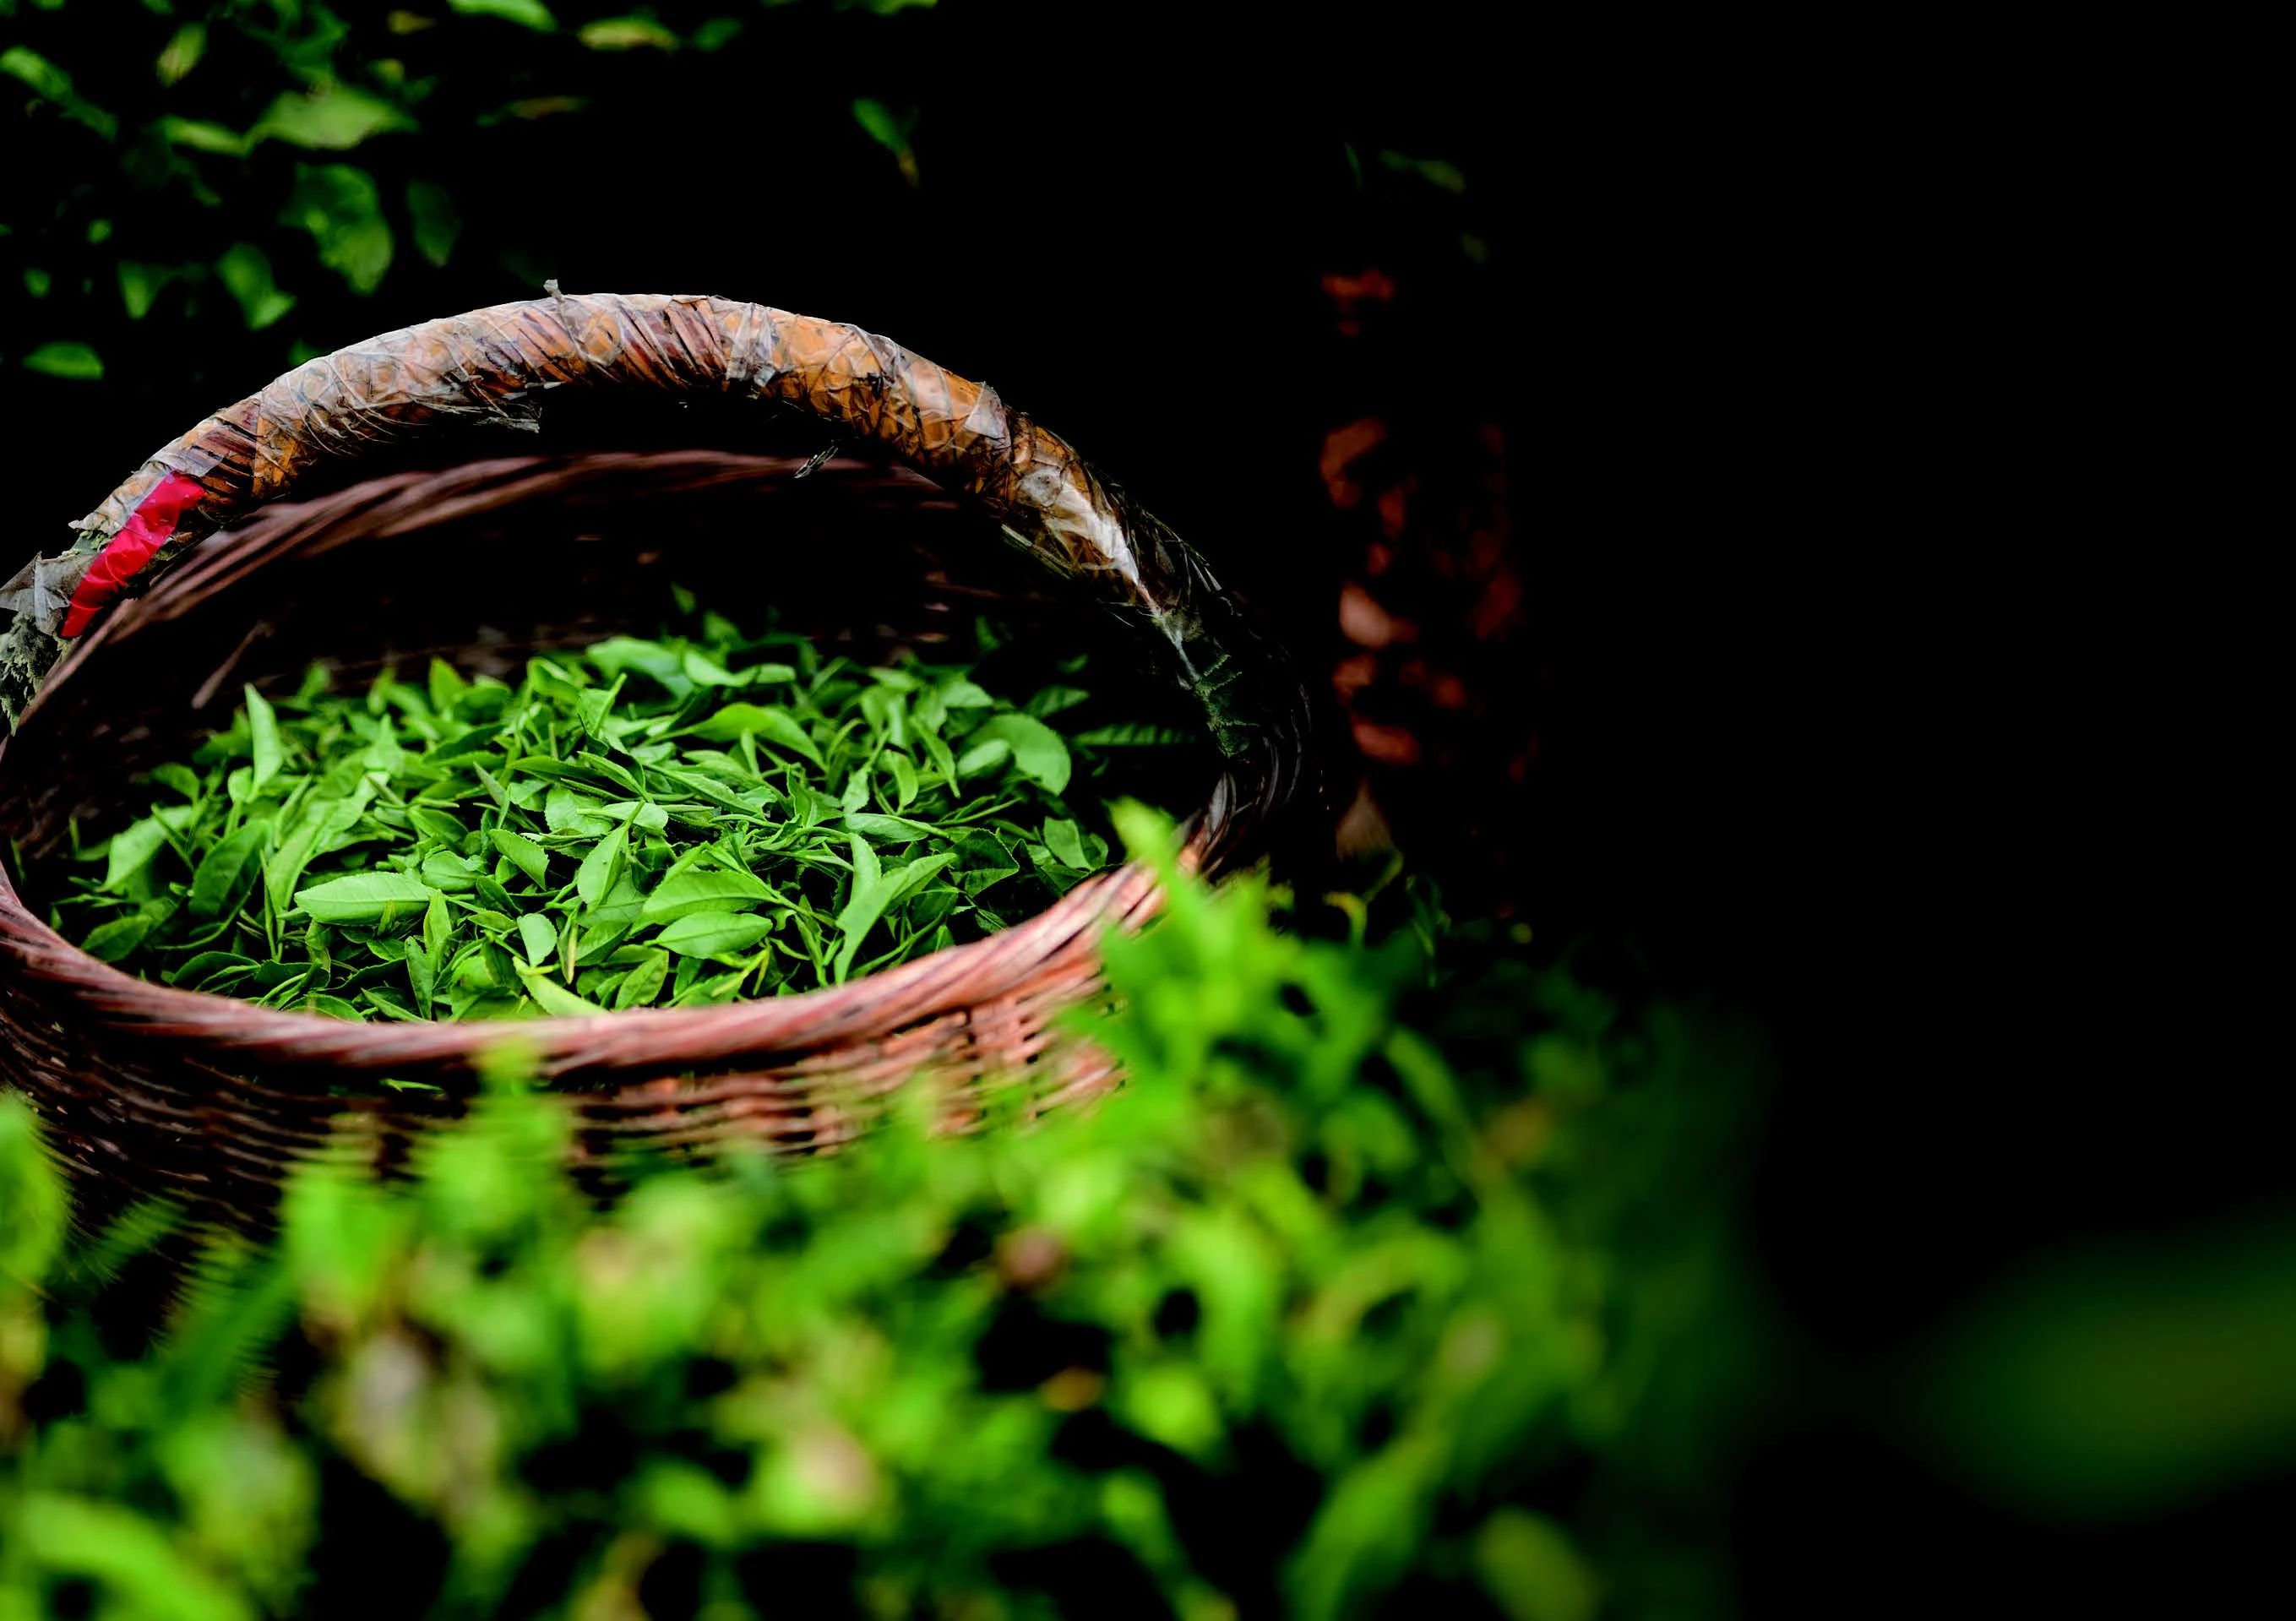 Haiqing tea: Exquisite tea cultivated in high-latitude natural settings